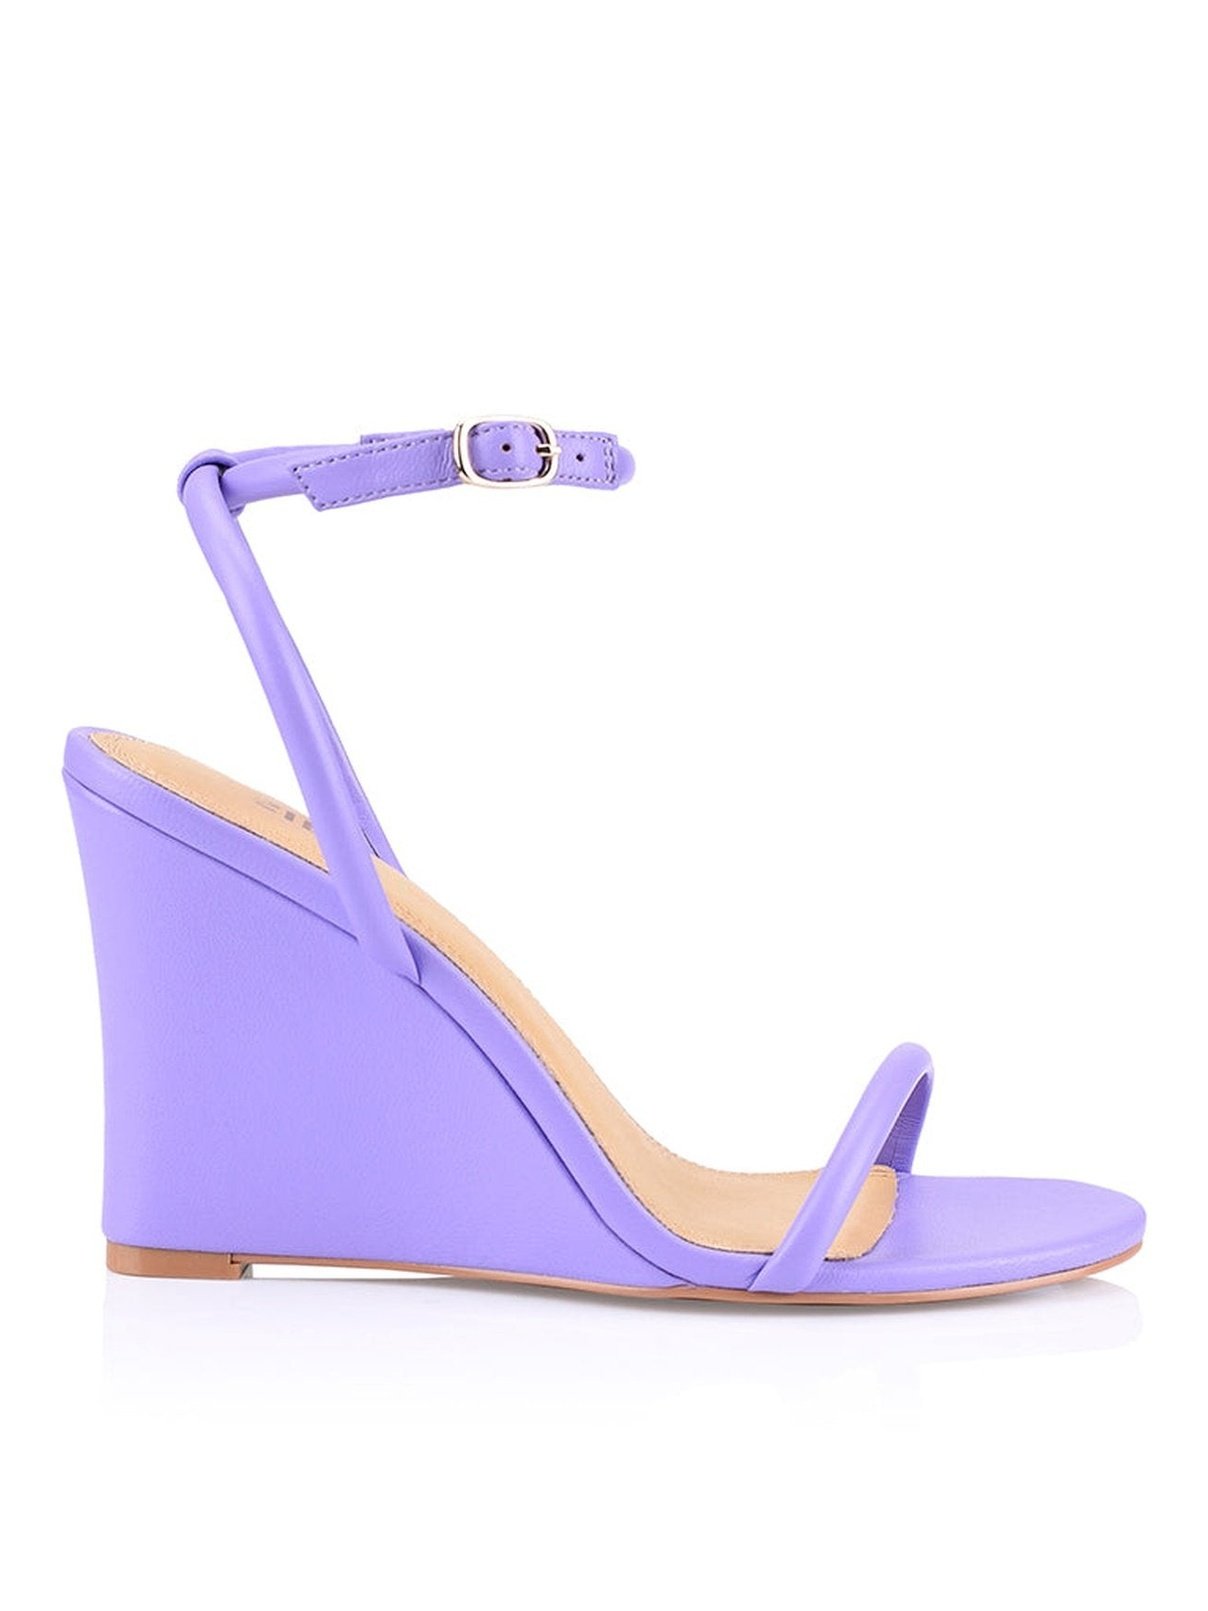 Bebe Wedge Sandals - Lilac Leather